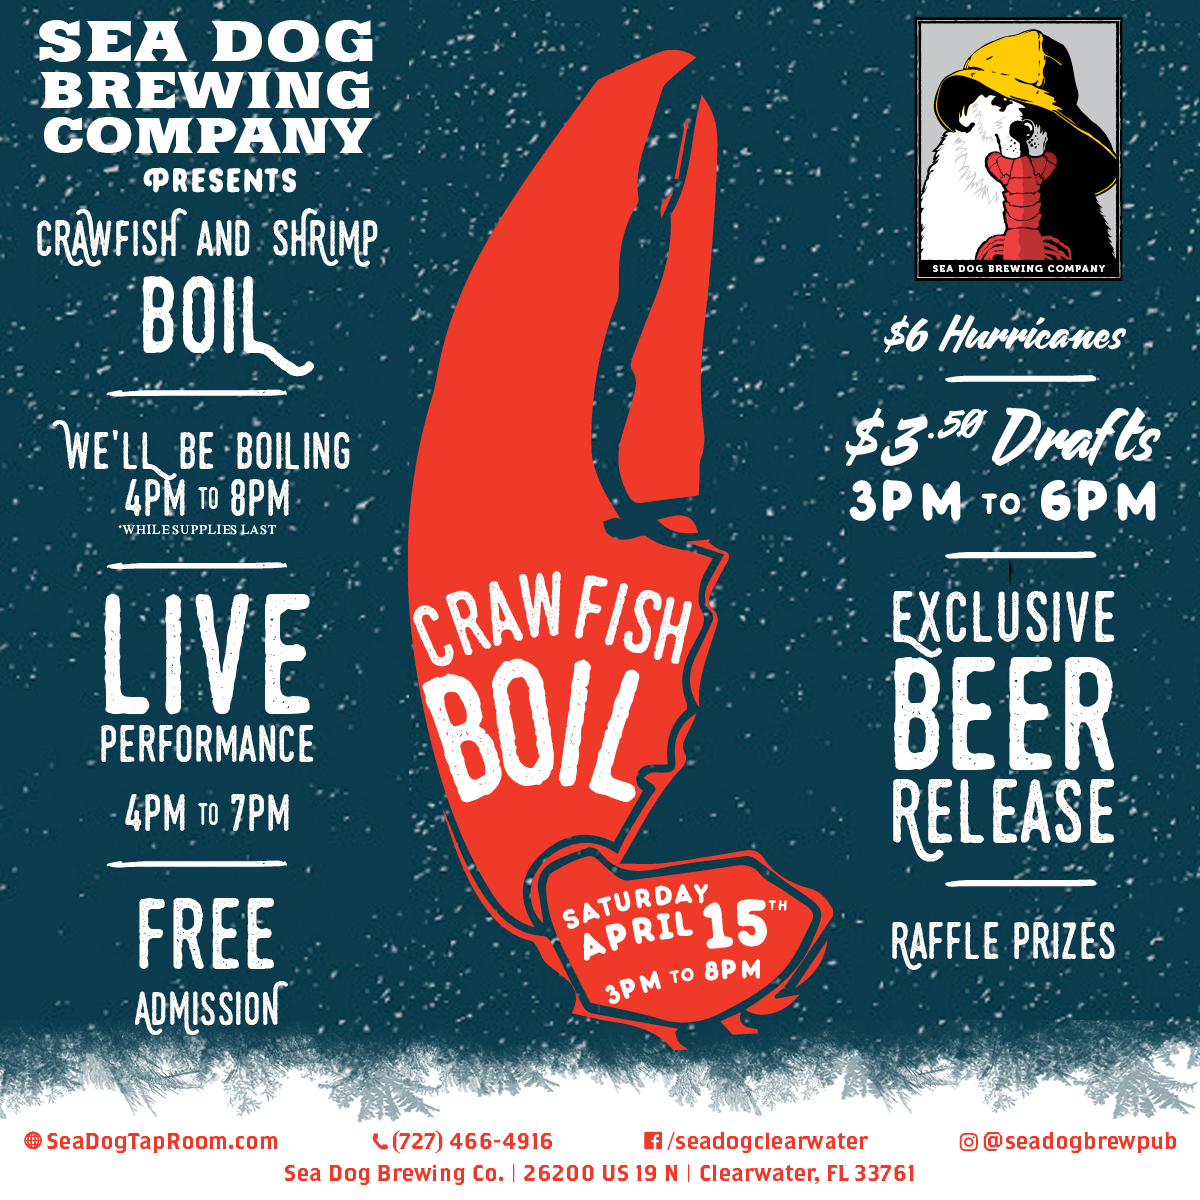 Client News: Sea Dog Brewing Presents “Crawfish & Crafts”, benefitting Habitat for Humanity